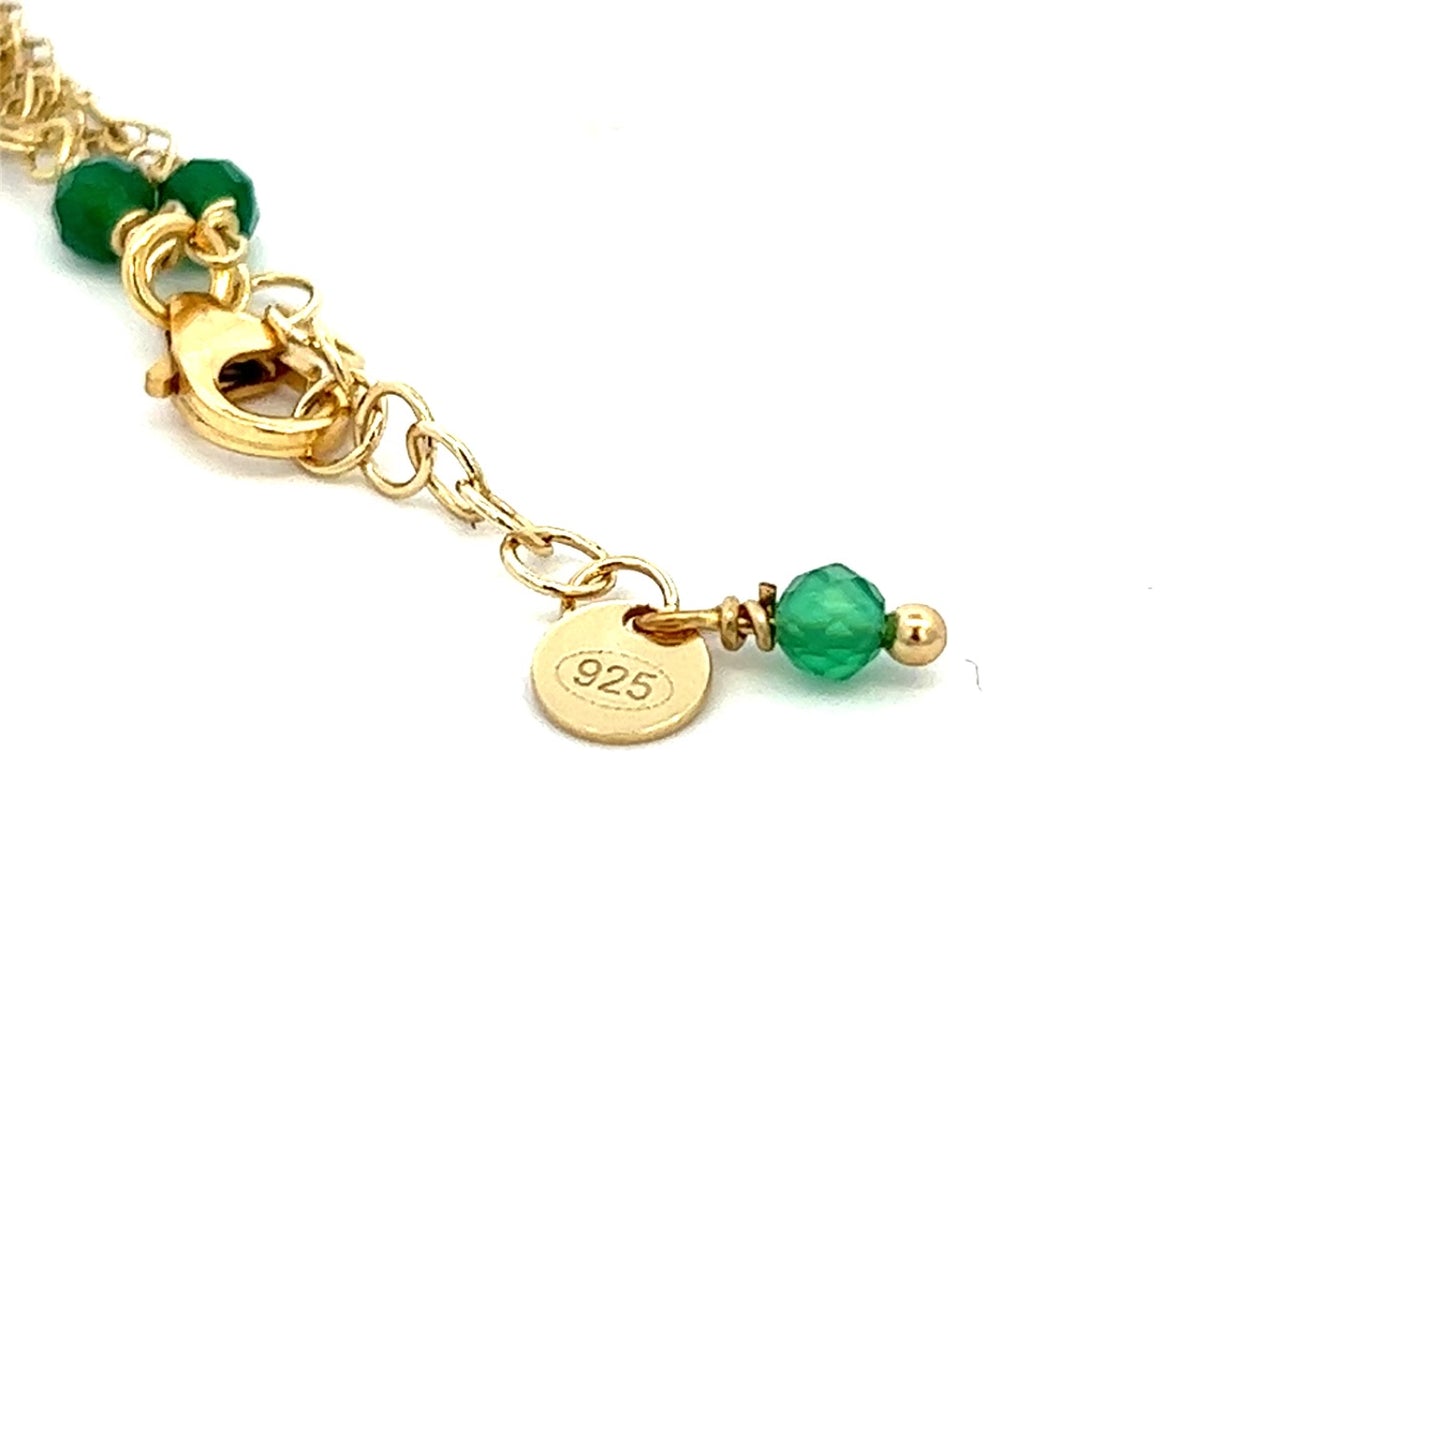 Italian Green Agate Gemstone Layered Necklace Gold